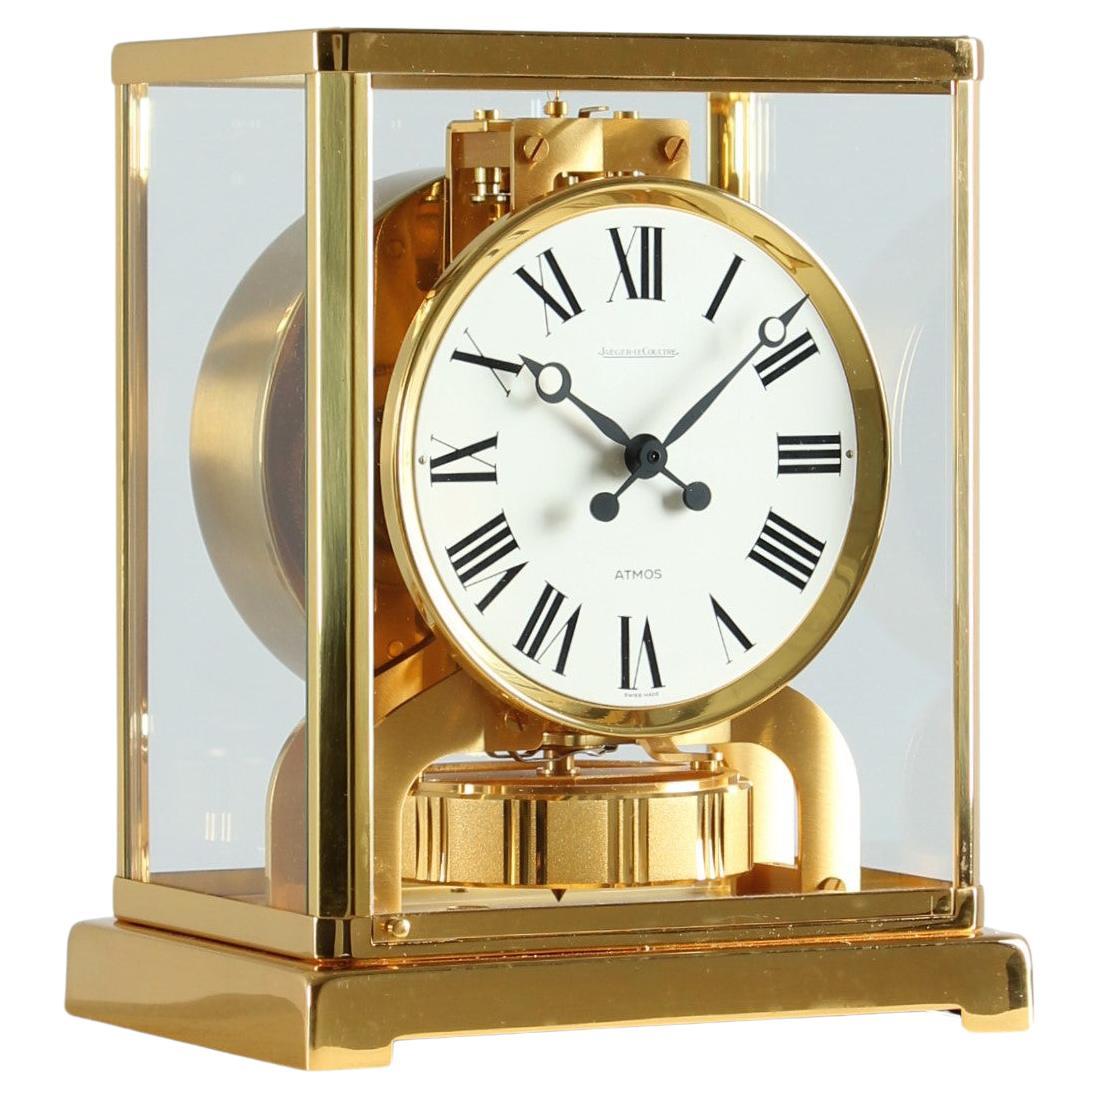 Jaeger LeCoultre, Atmos Clock From 1980 With Full Dial For Sale